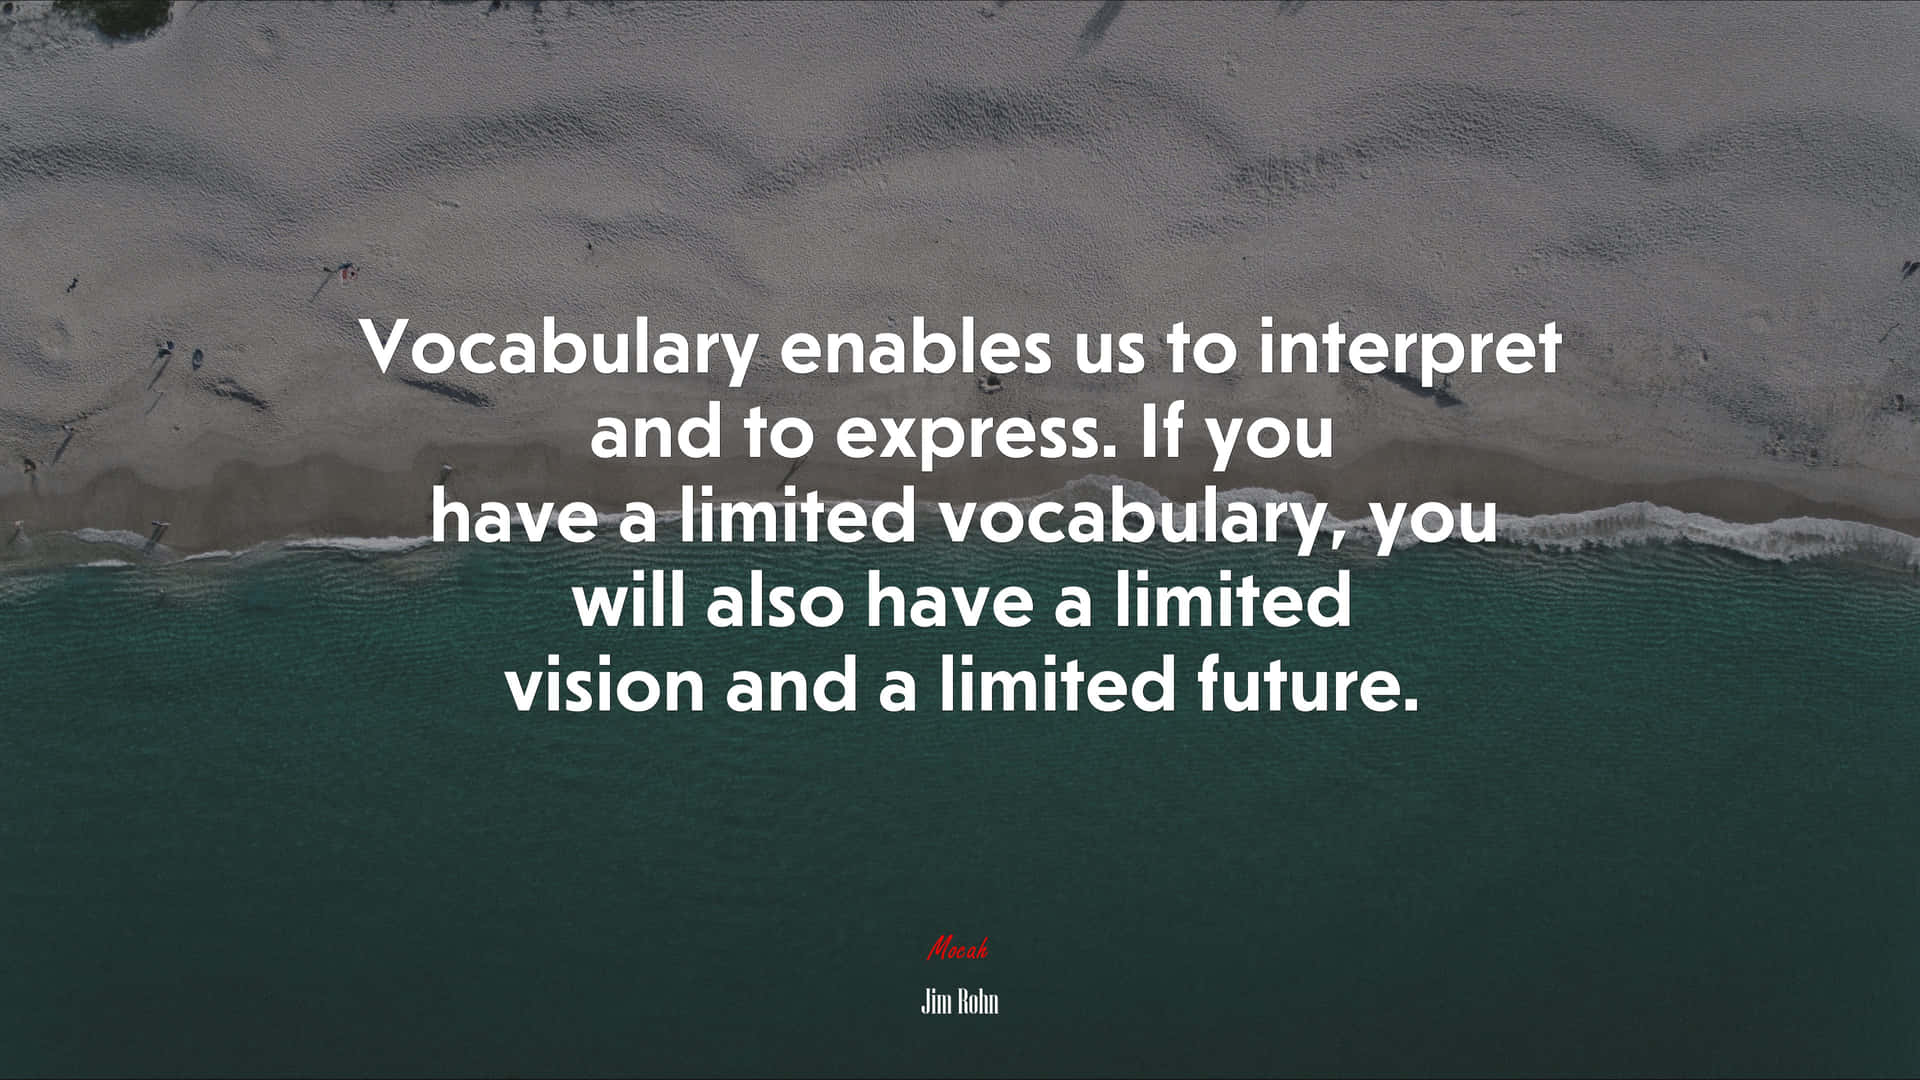 A Quote That Says Vocabulary Enables Us To Interpret And Express If You Have Limited Vocabulary You Will Have Limited